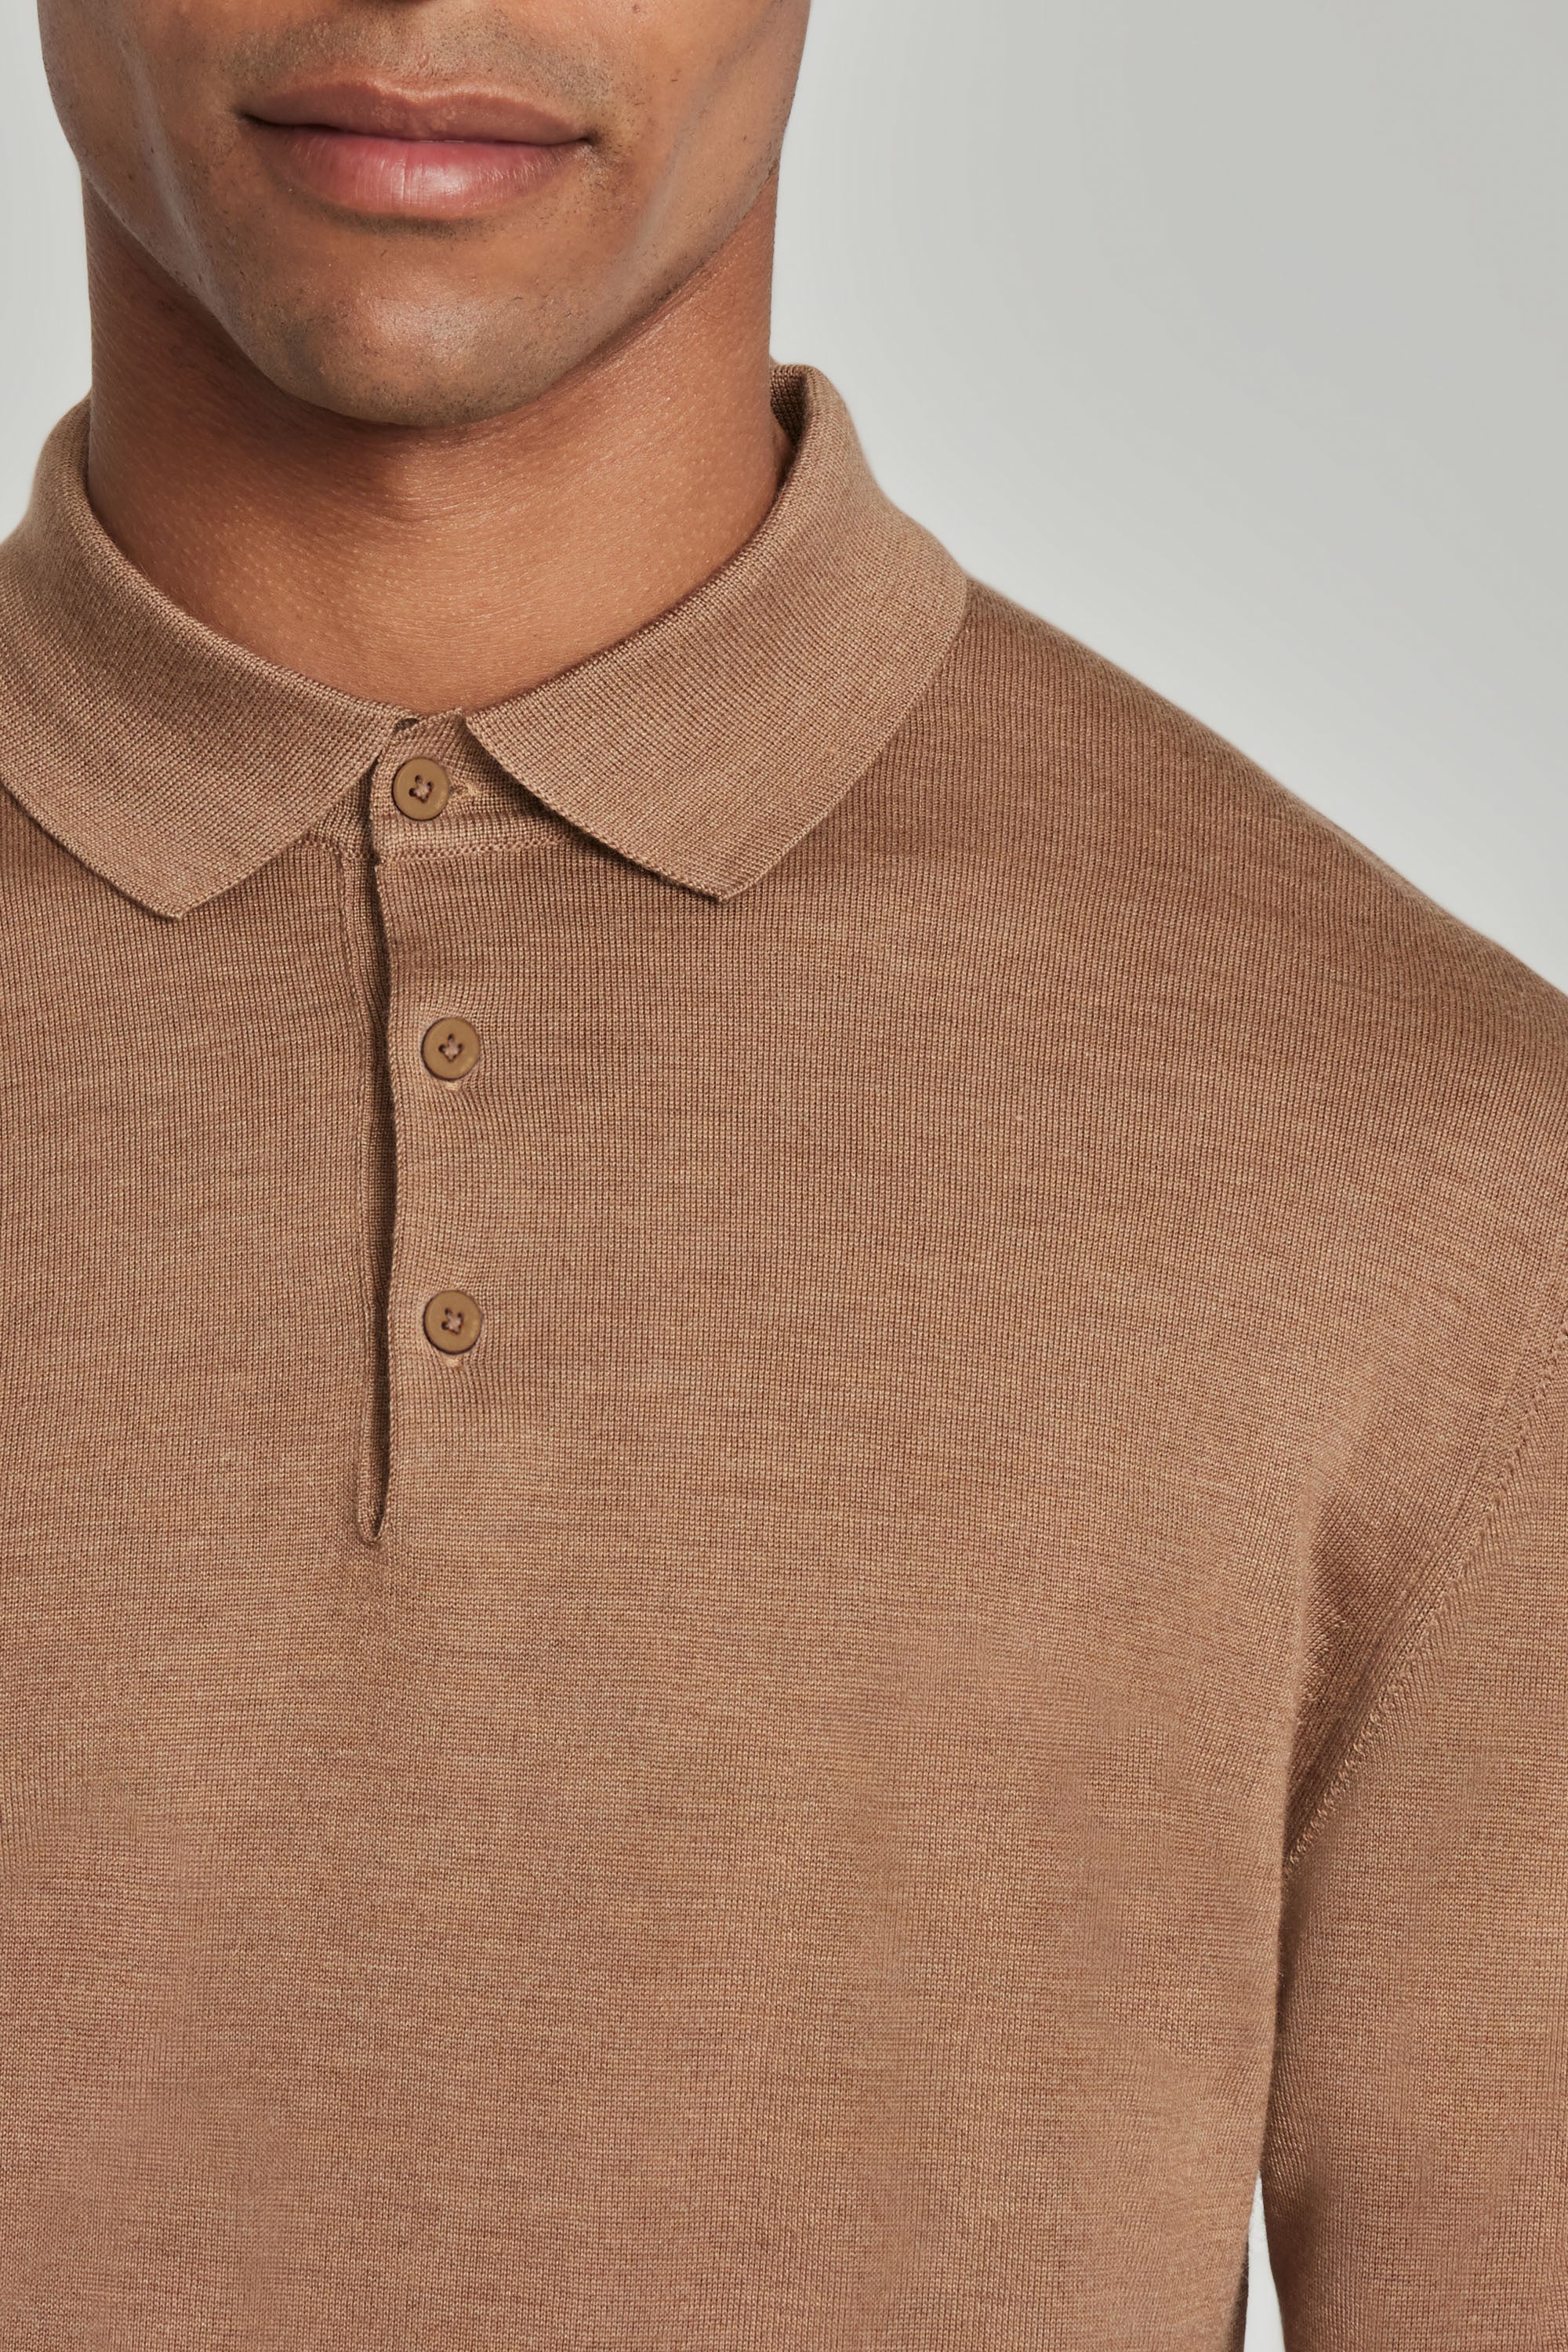 Alt view 2 Redfern Wool, Silk and Cashmere Long Sleeve Polo in Vicuna